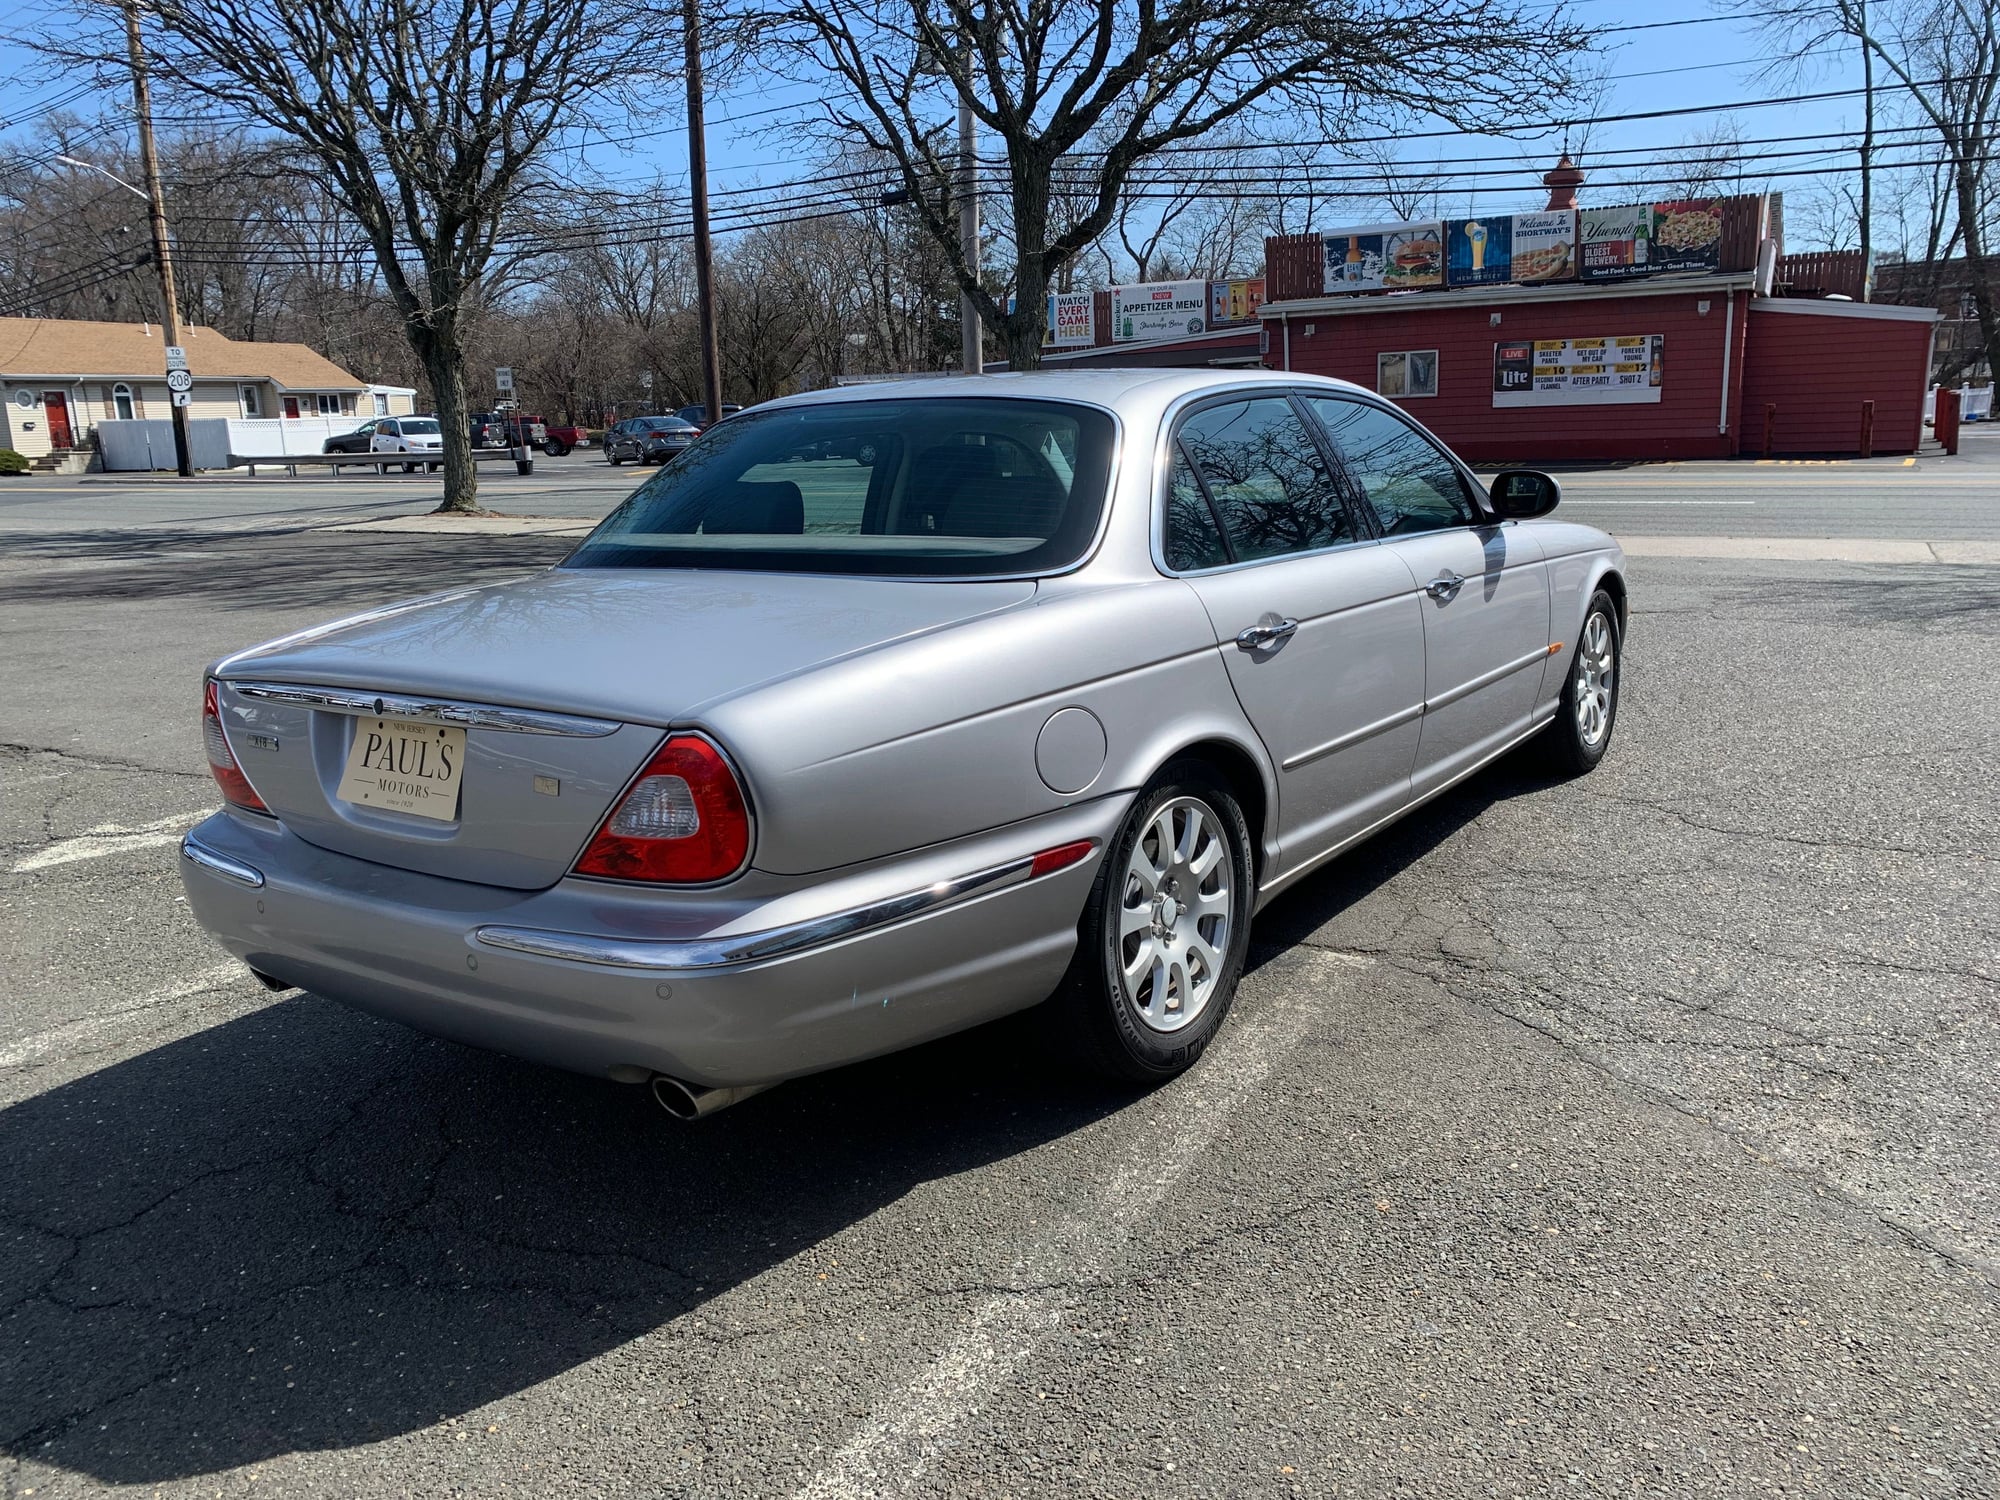 2004 Jaguar XJ8 - Nice, Clean and In Excellent Condition - Used - VIN SAJEA71C34SG11188 - 88,001 Miles - 8 cyl - 2WD - Automatic - Sedan - Silver - Hawthorne, NJ 07506, United States